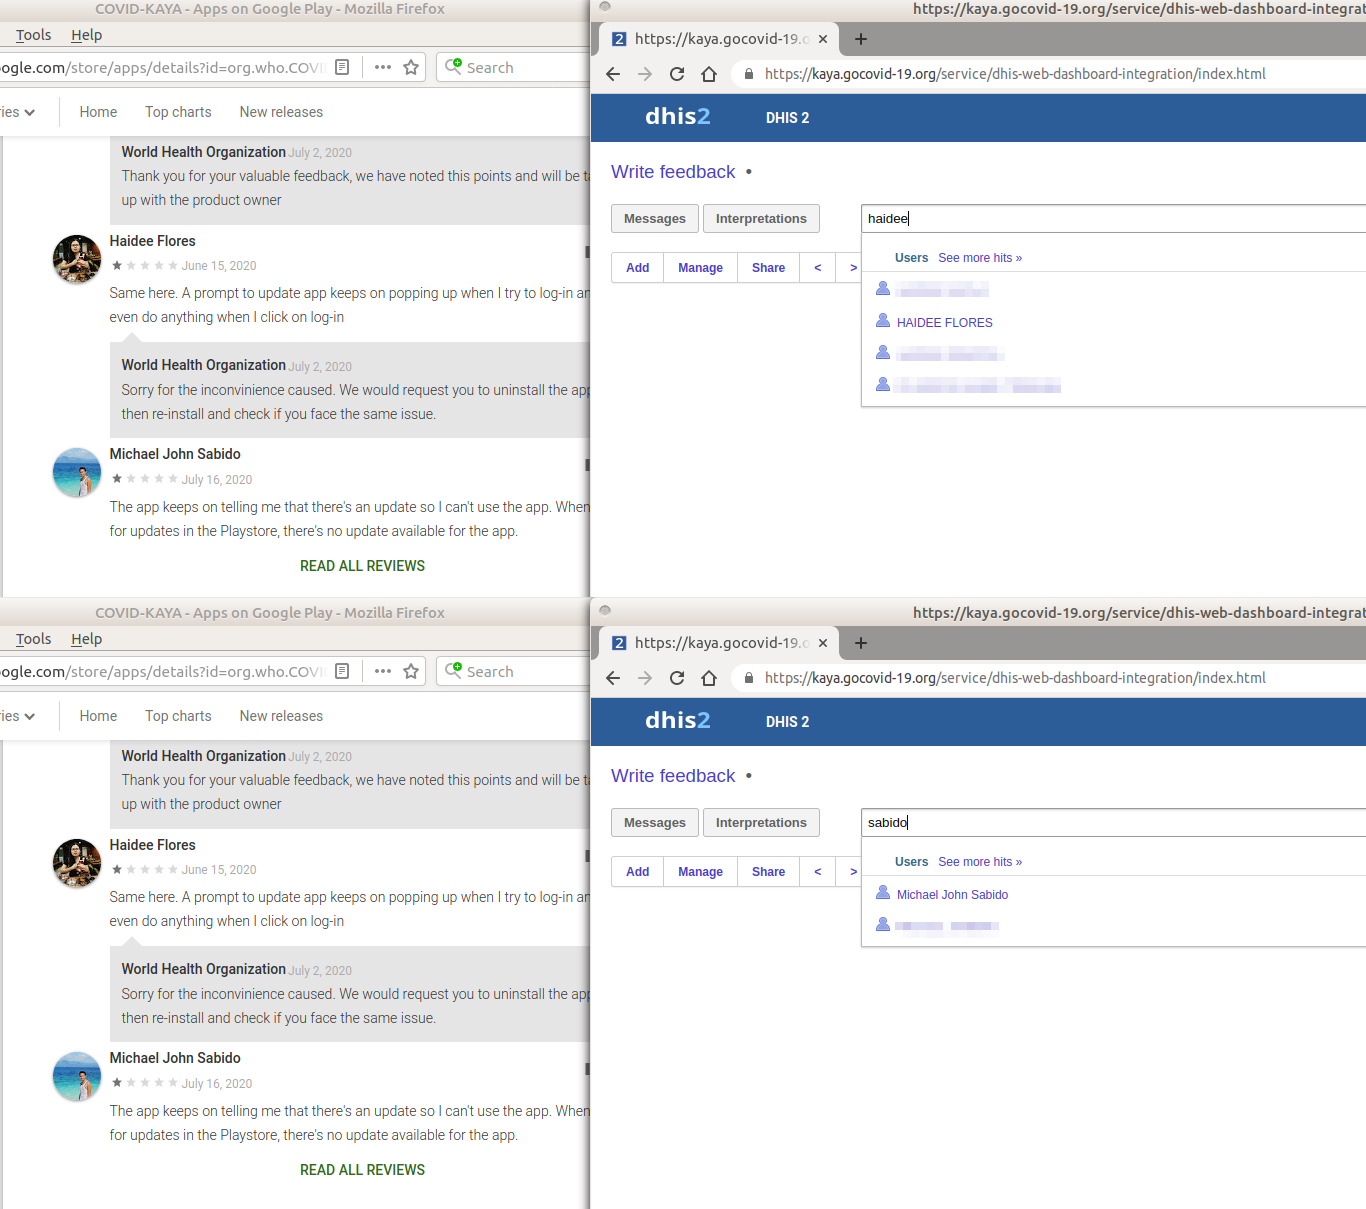 Screenshots of Google Play Store reviews (left) and web app dashboard (right) showing a match between public reviewers and the web app user list.